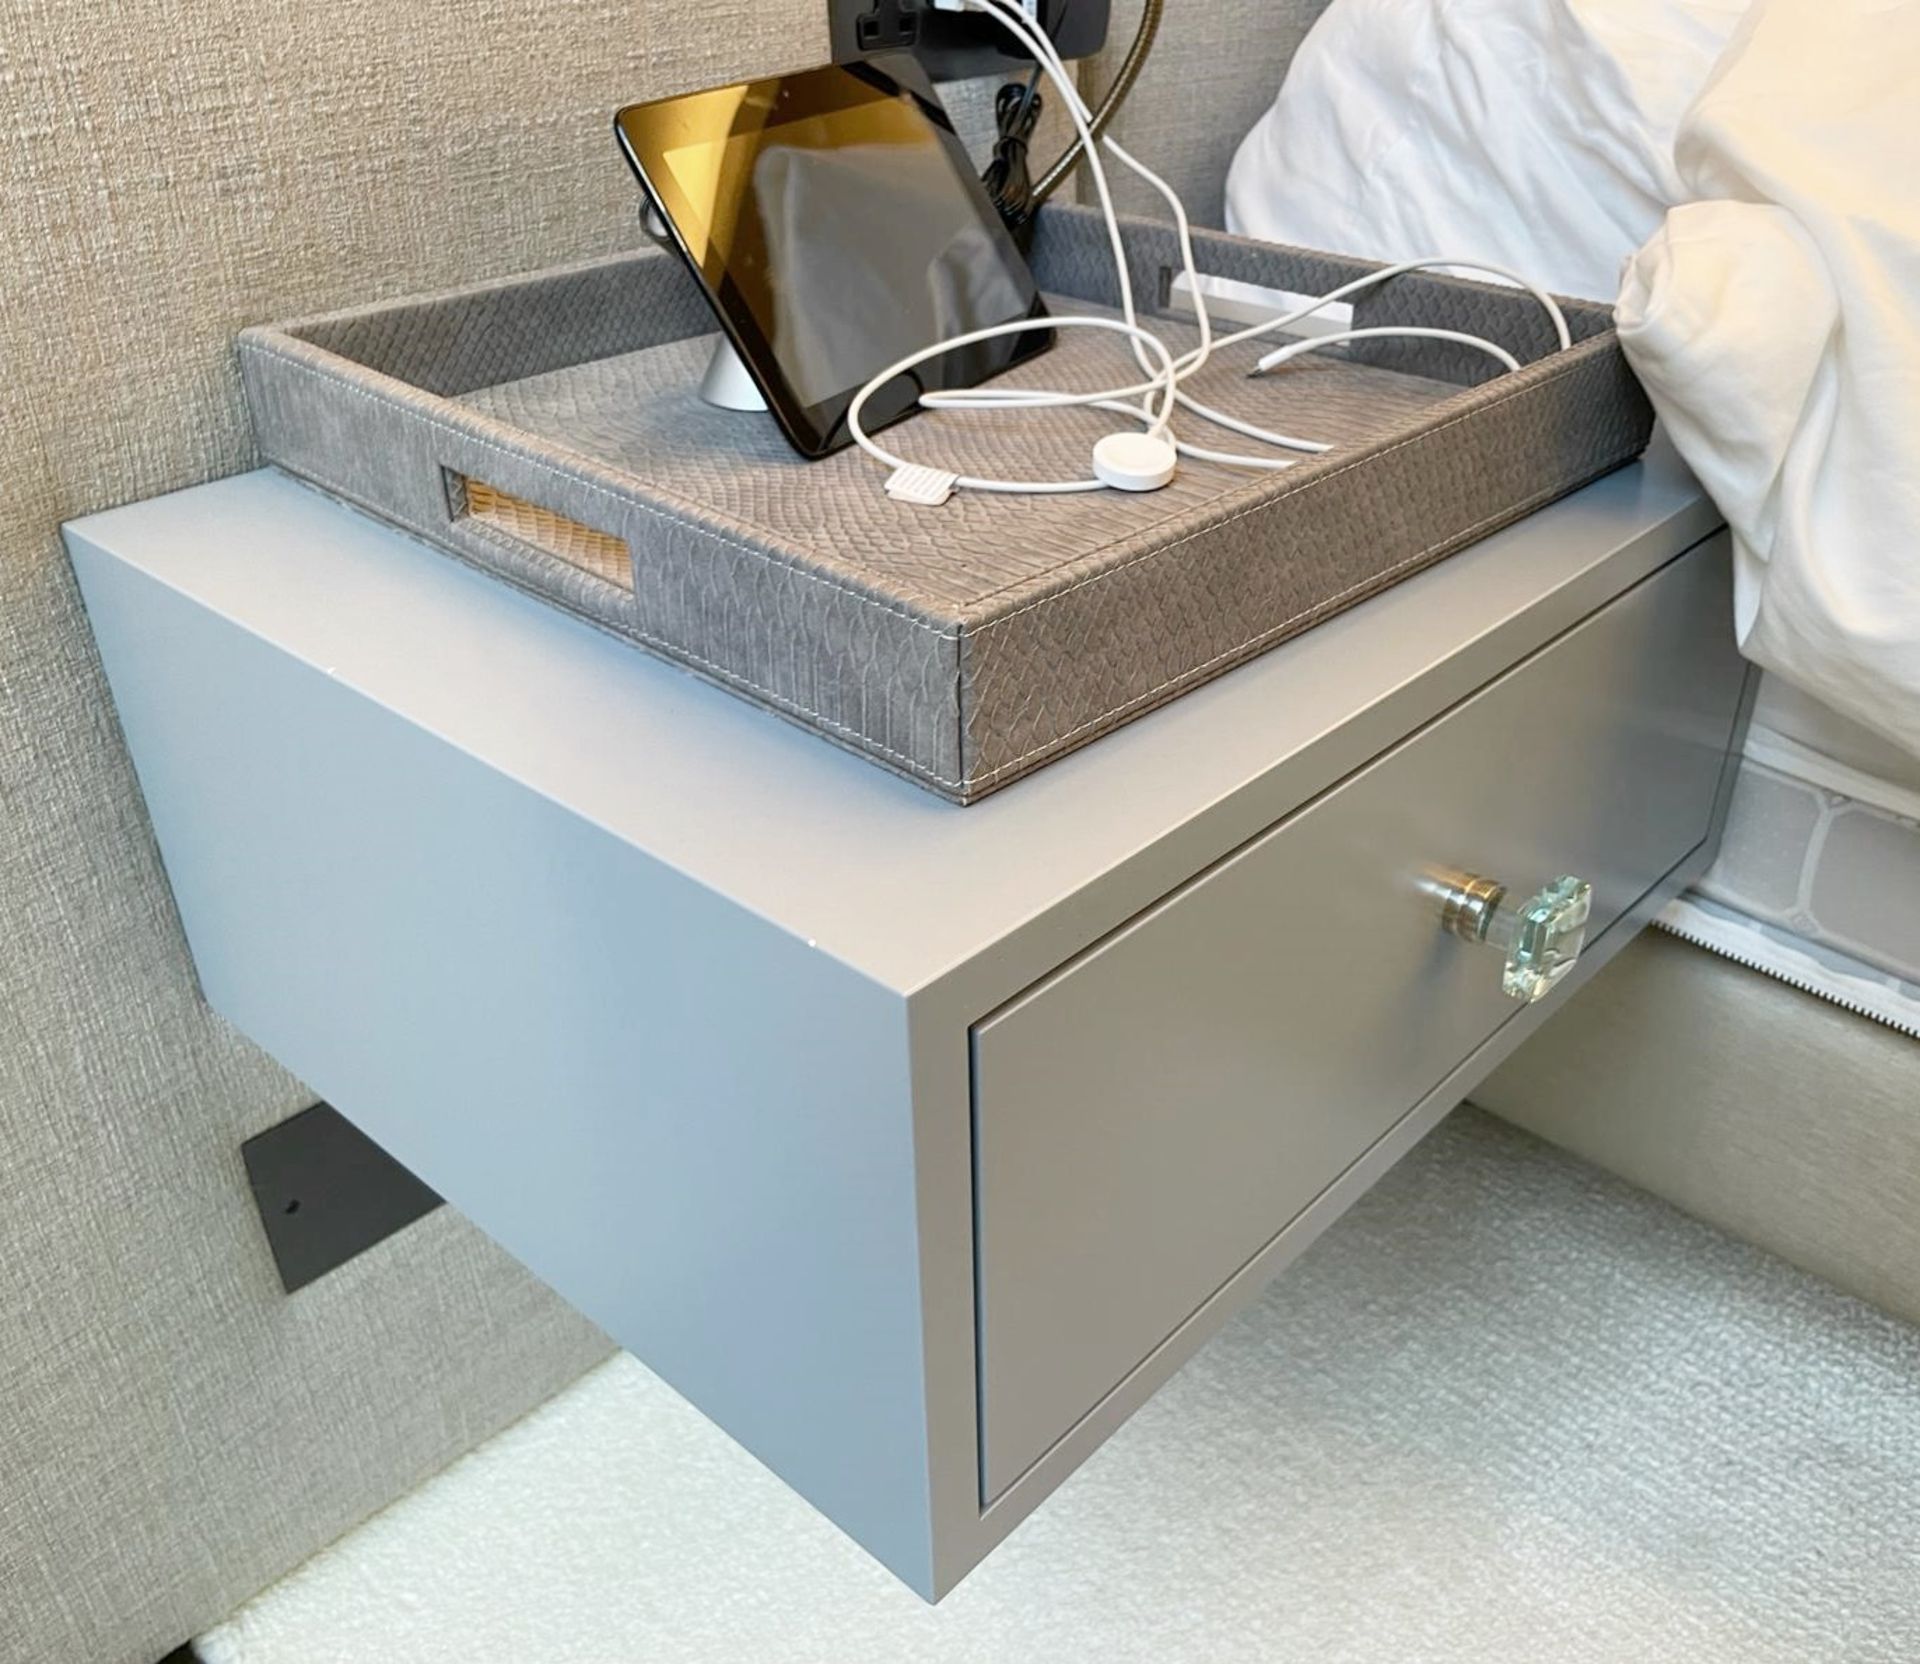 Pair of Stylish Wall Hung Bedside Drawers with a Grey Lacquer Finish and Glass Handles - Image 7 of 14